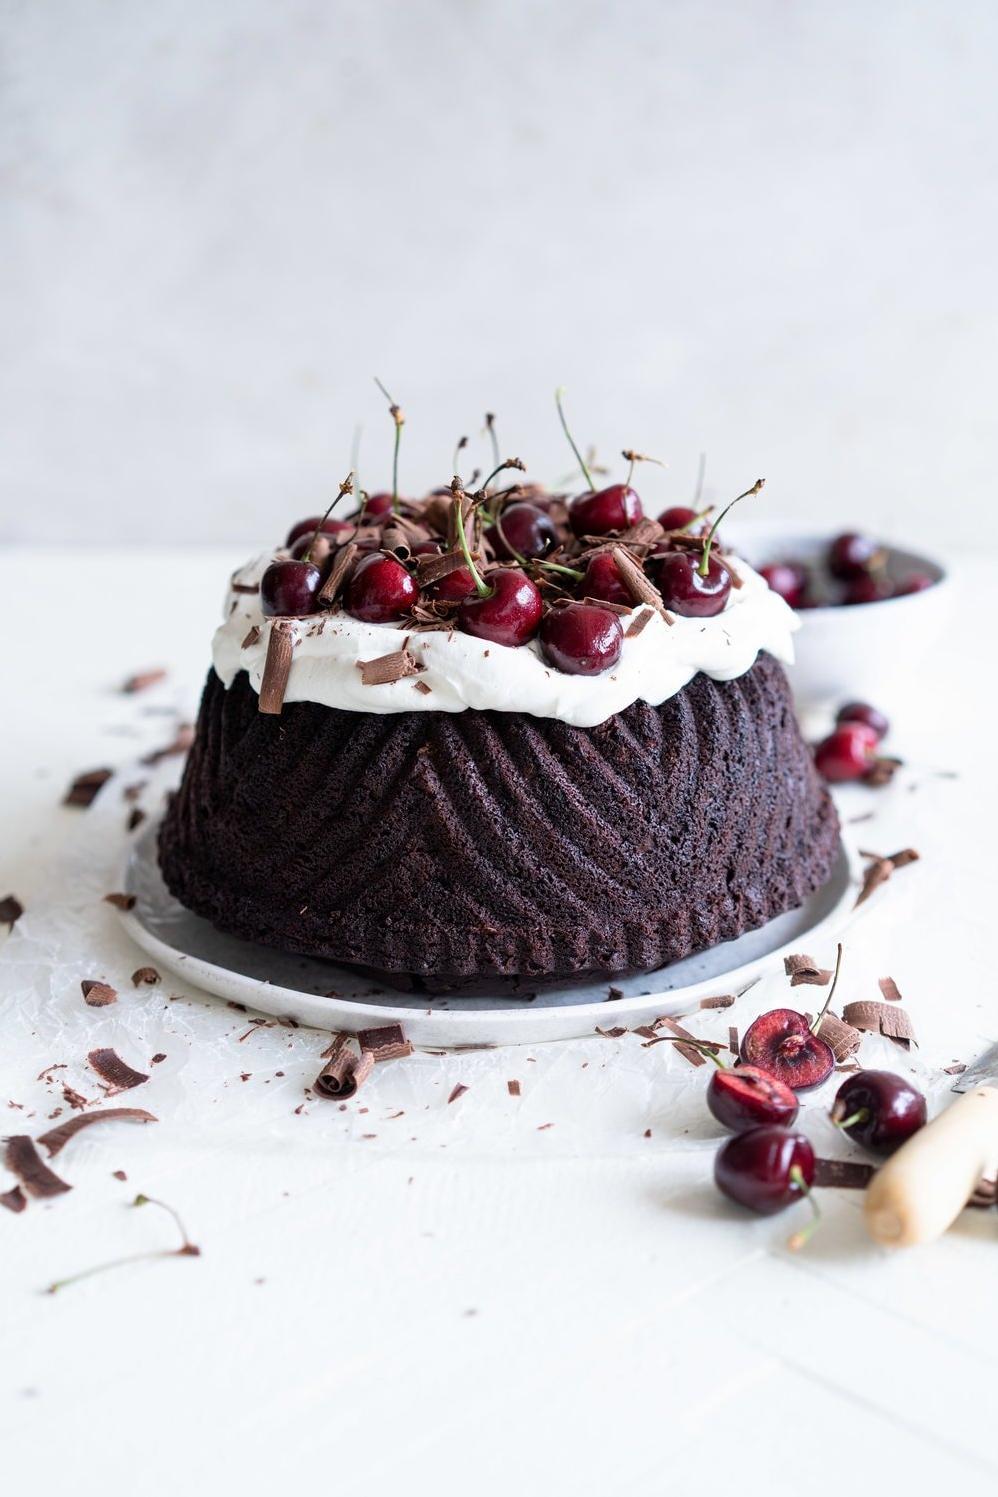 Indulge in Decadence with Black Forest Pound Cake